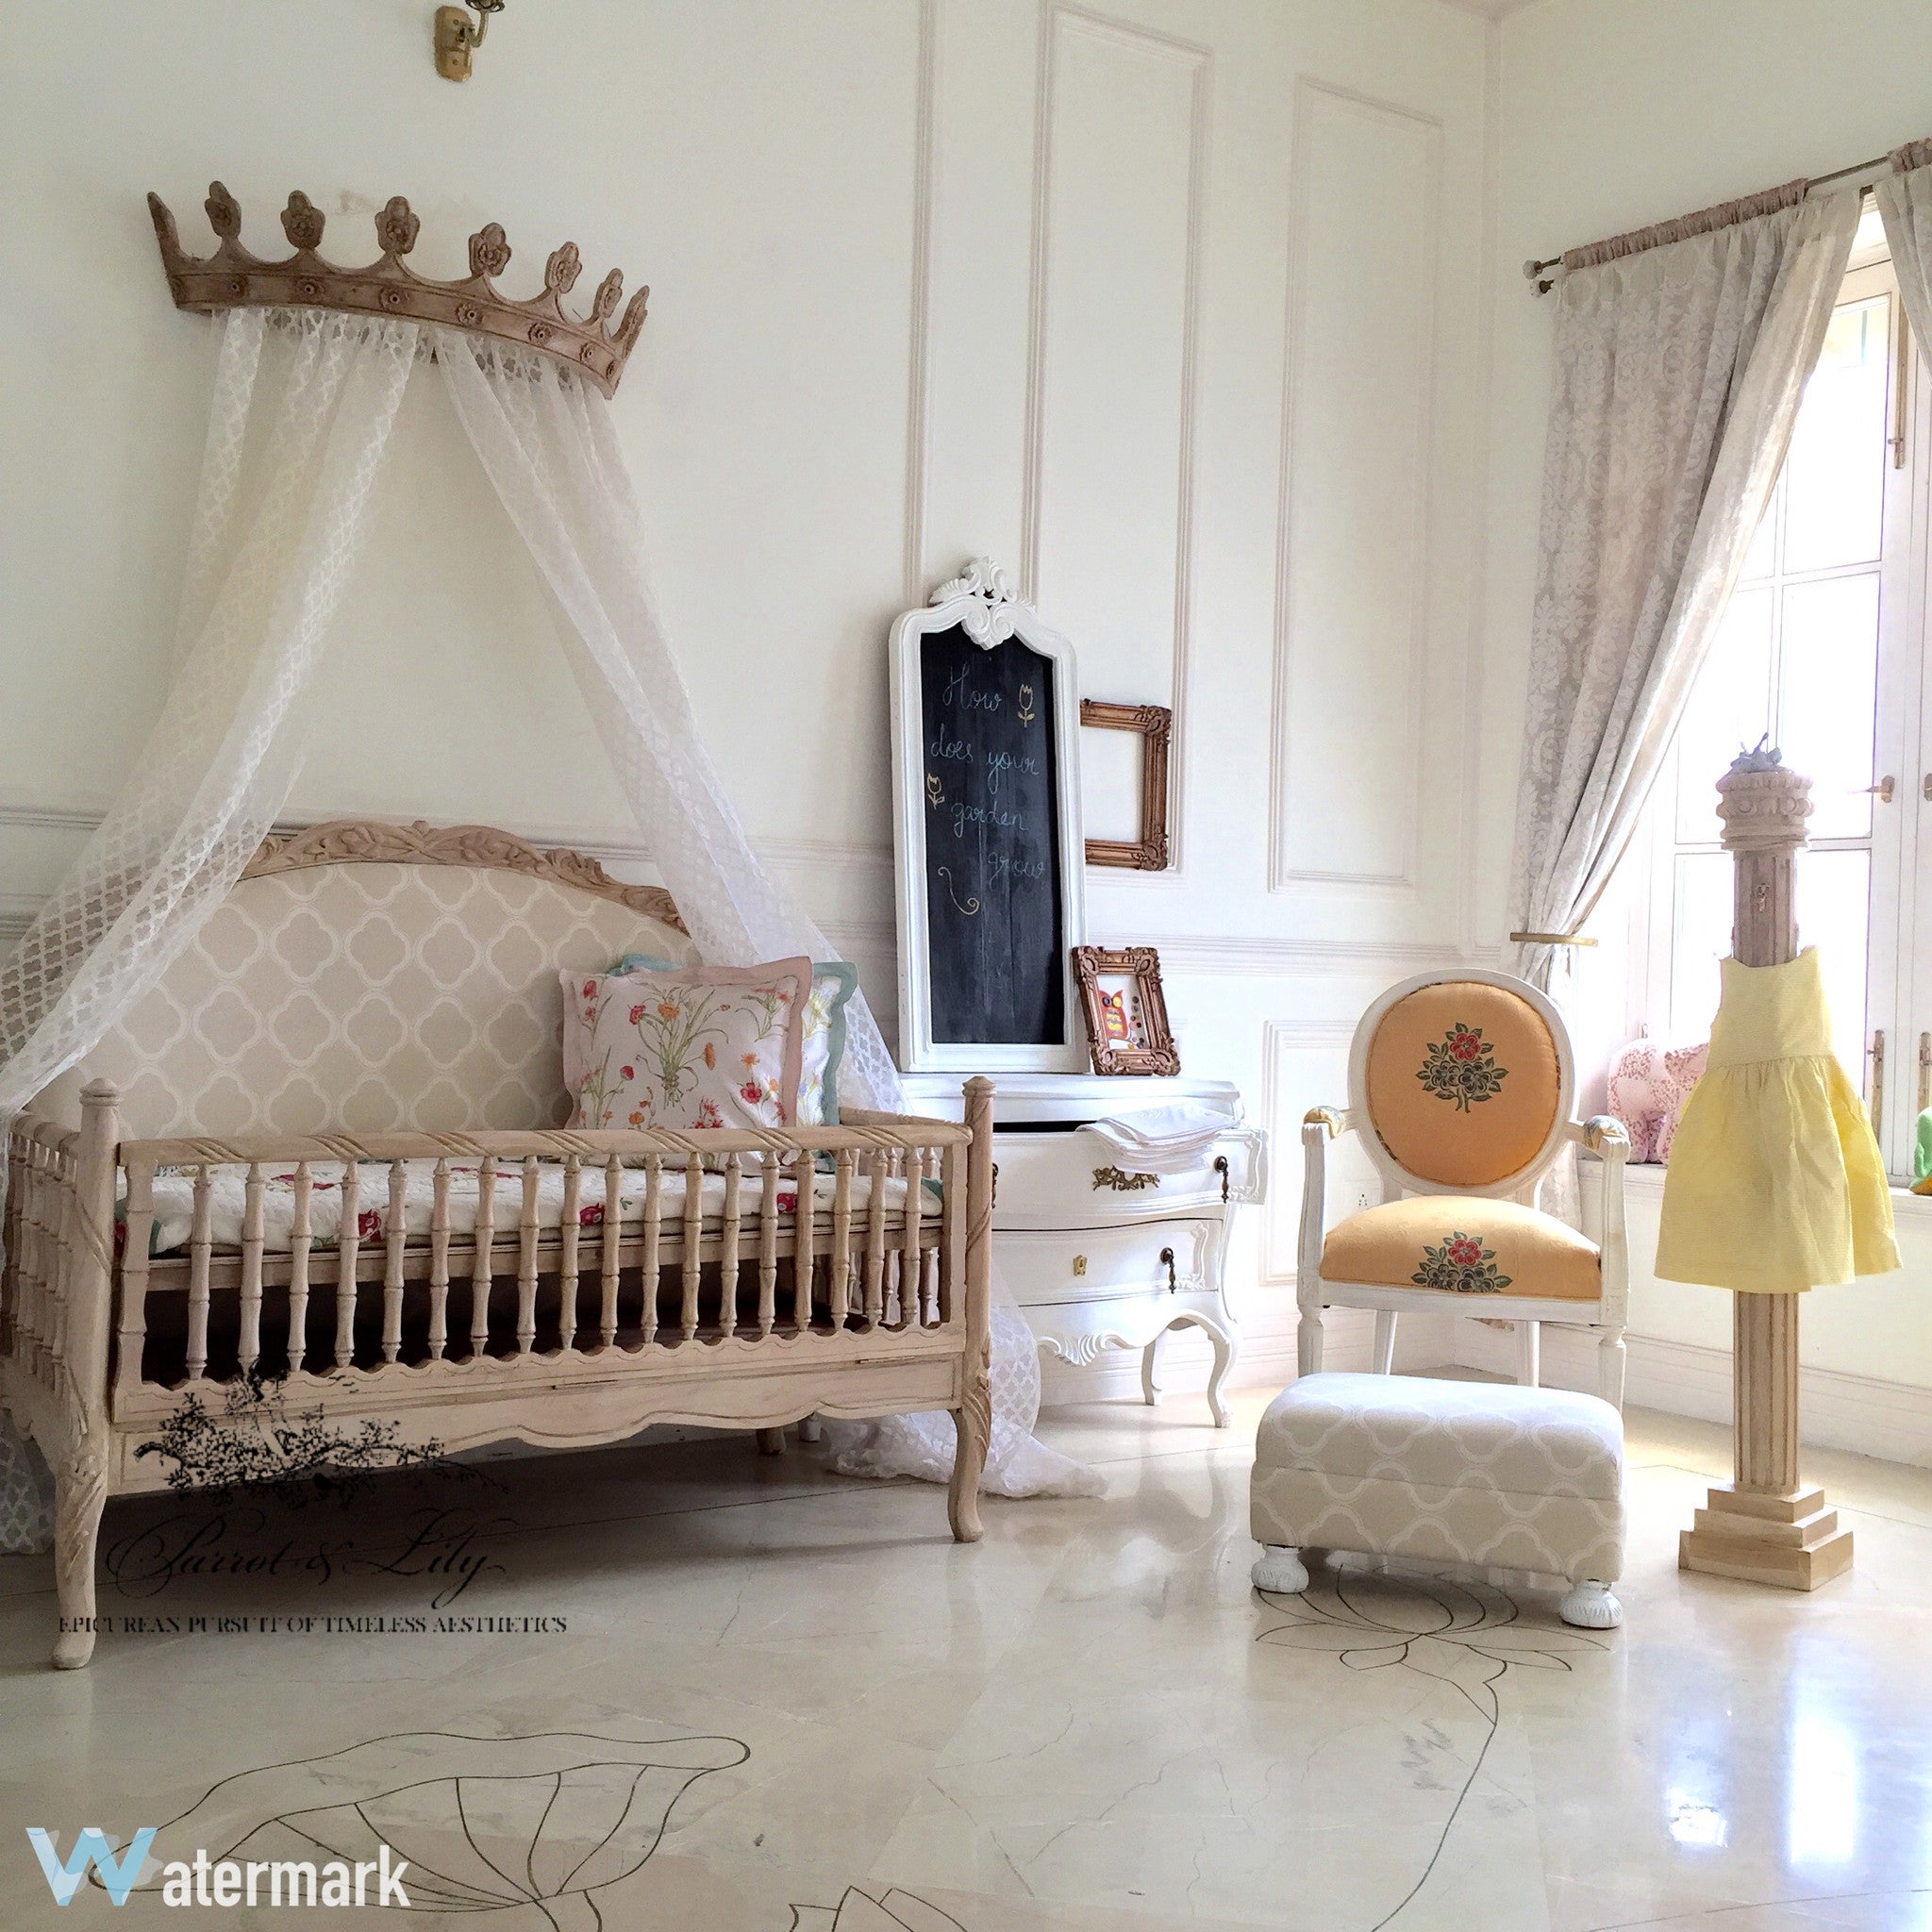 The dreamy cot inspired by Louis XV